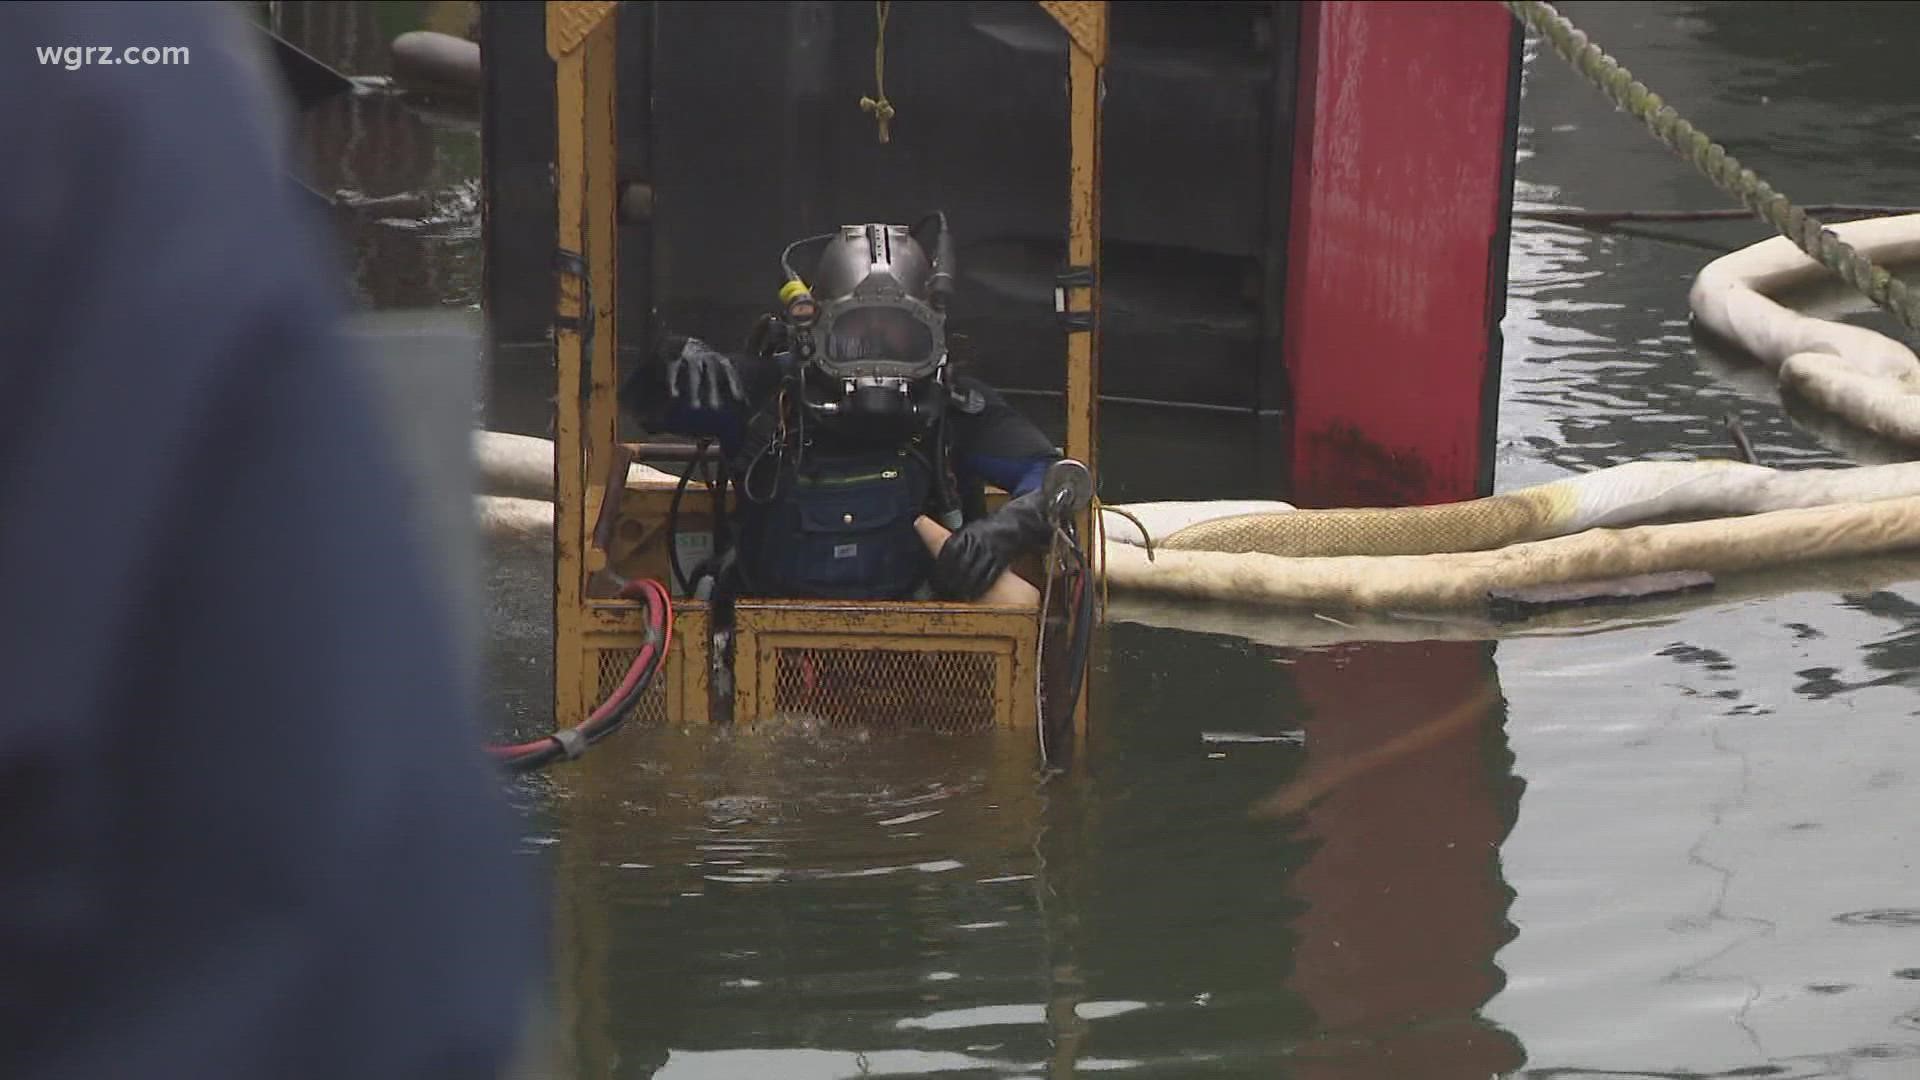 Divers are continuing to plug holes in the stern and once they are able to get personnel inside the vessel, they will be able to better seal the vessel.